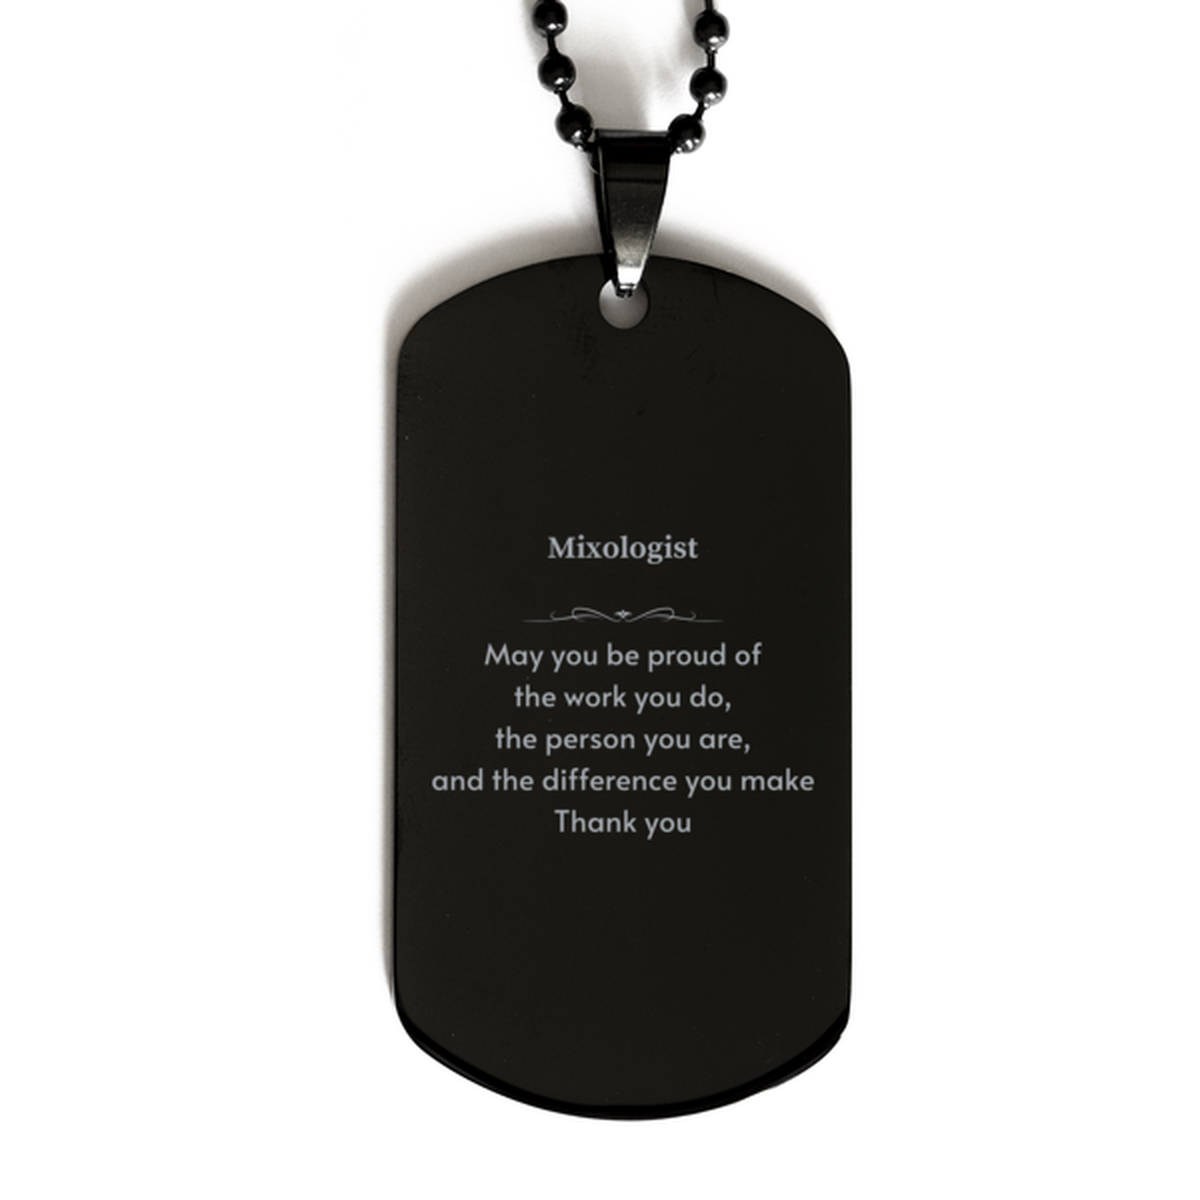 Heartwarming Black Dog Tag Retirement Coworkers Gifts for Mixologist, Mixologist May You be proud of the work you do, the person you are Gifts for Boss Men Women Friends